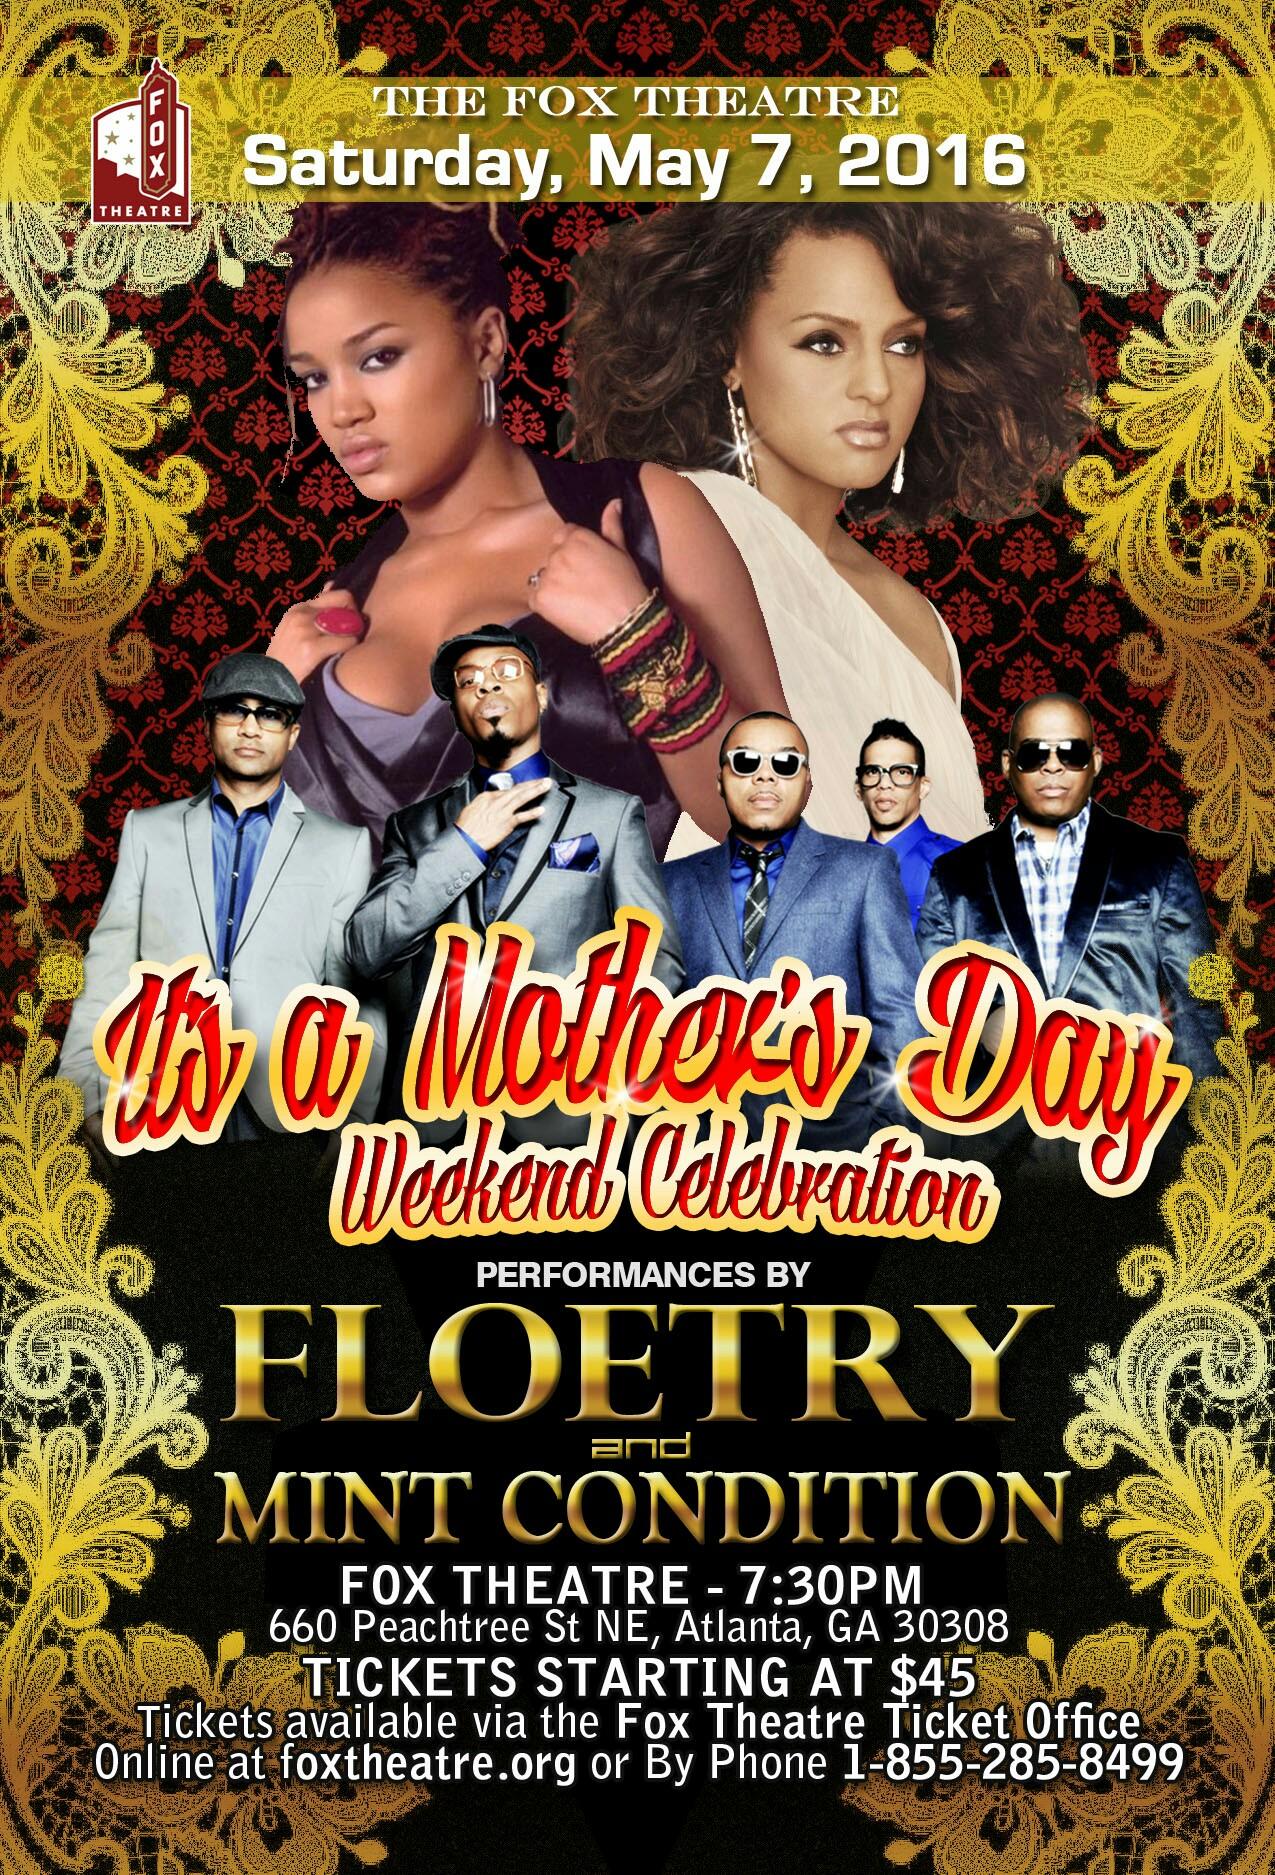 Mother's Day Weekend Celebration with Floetry and Mint Condition